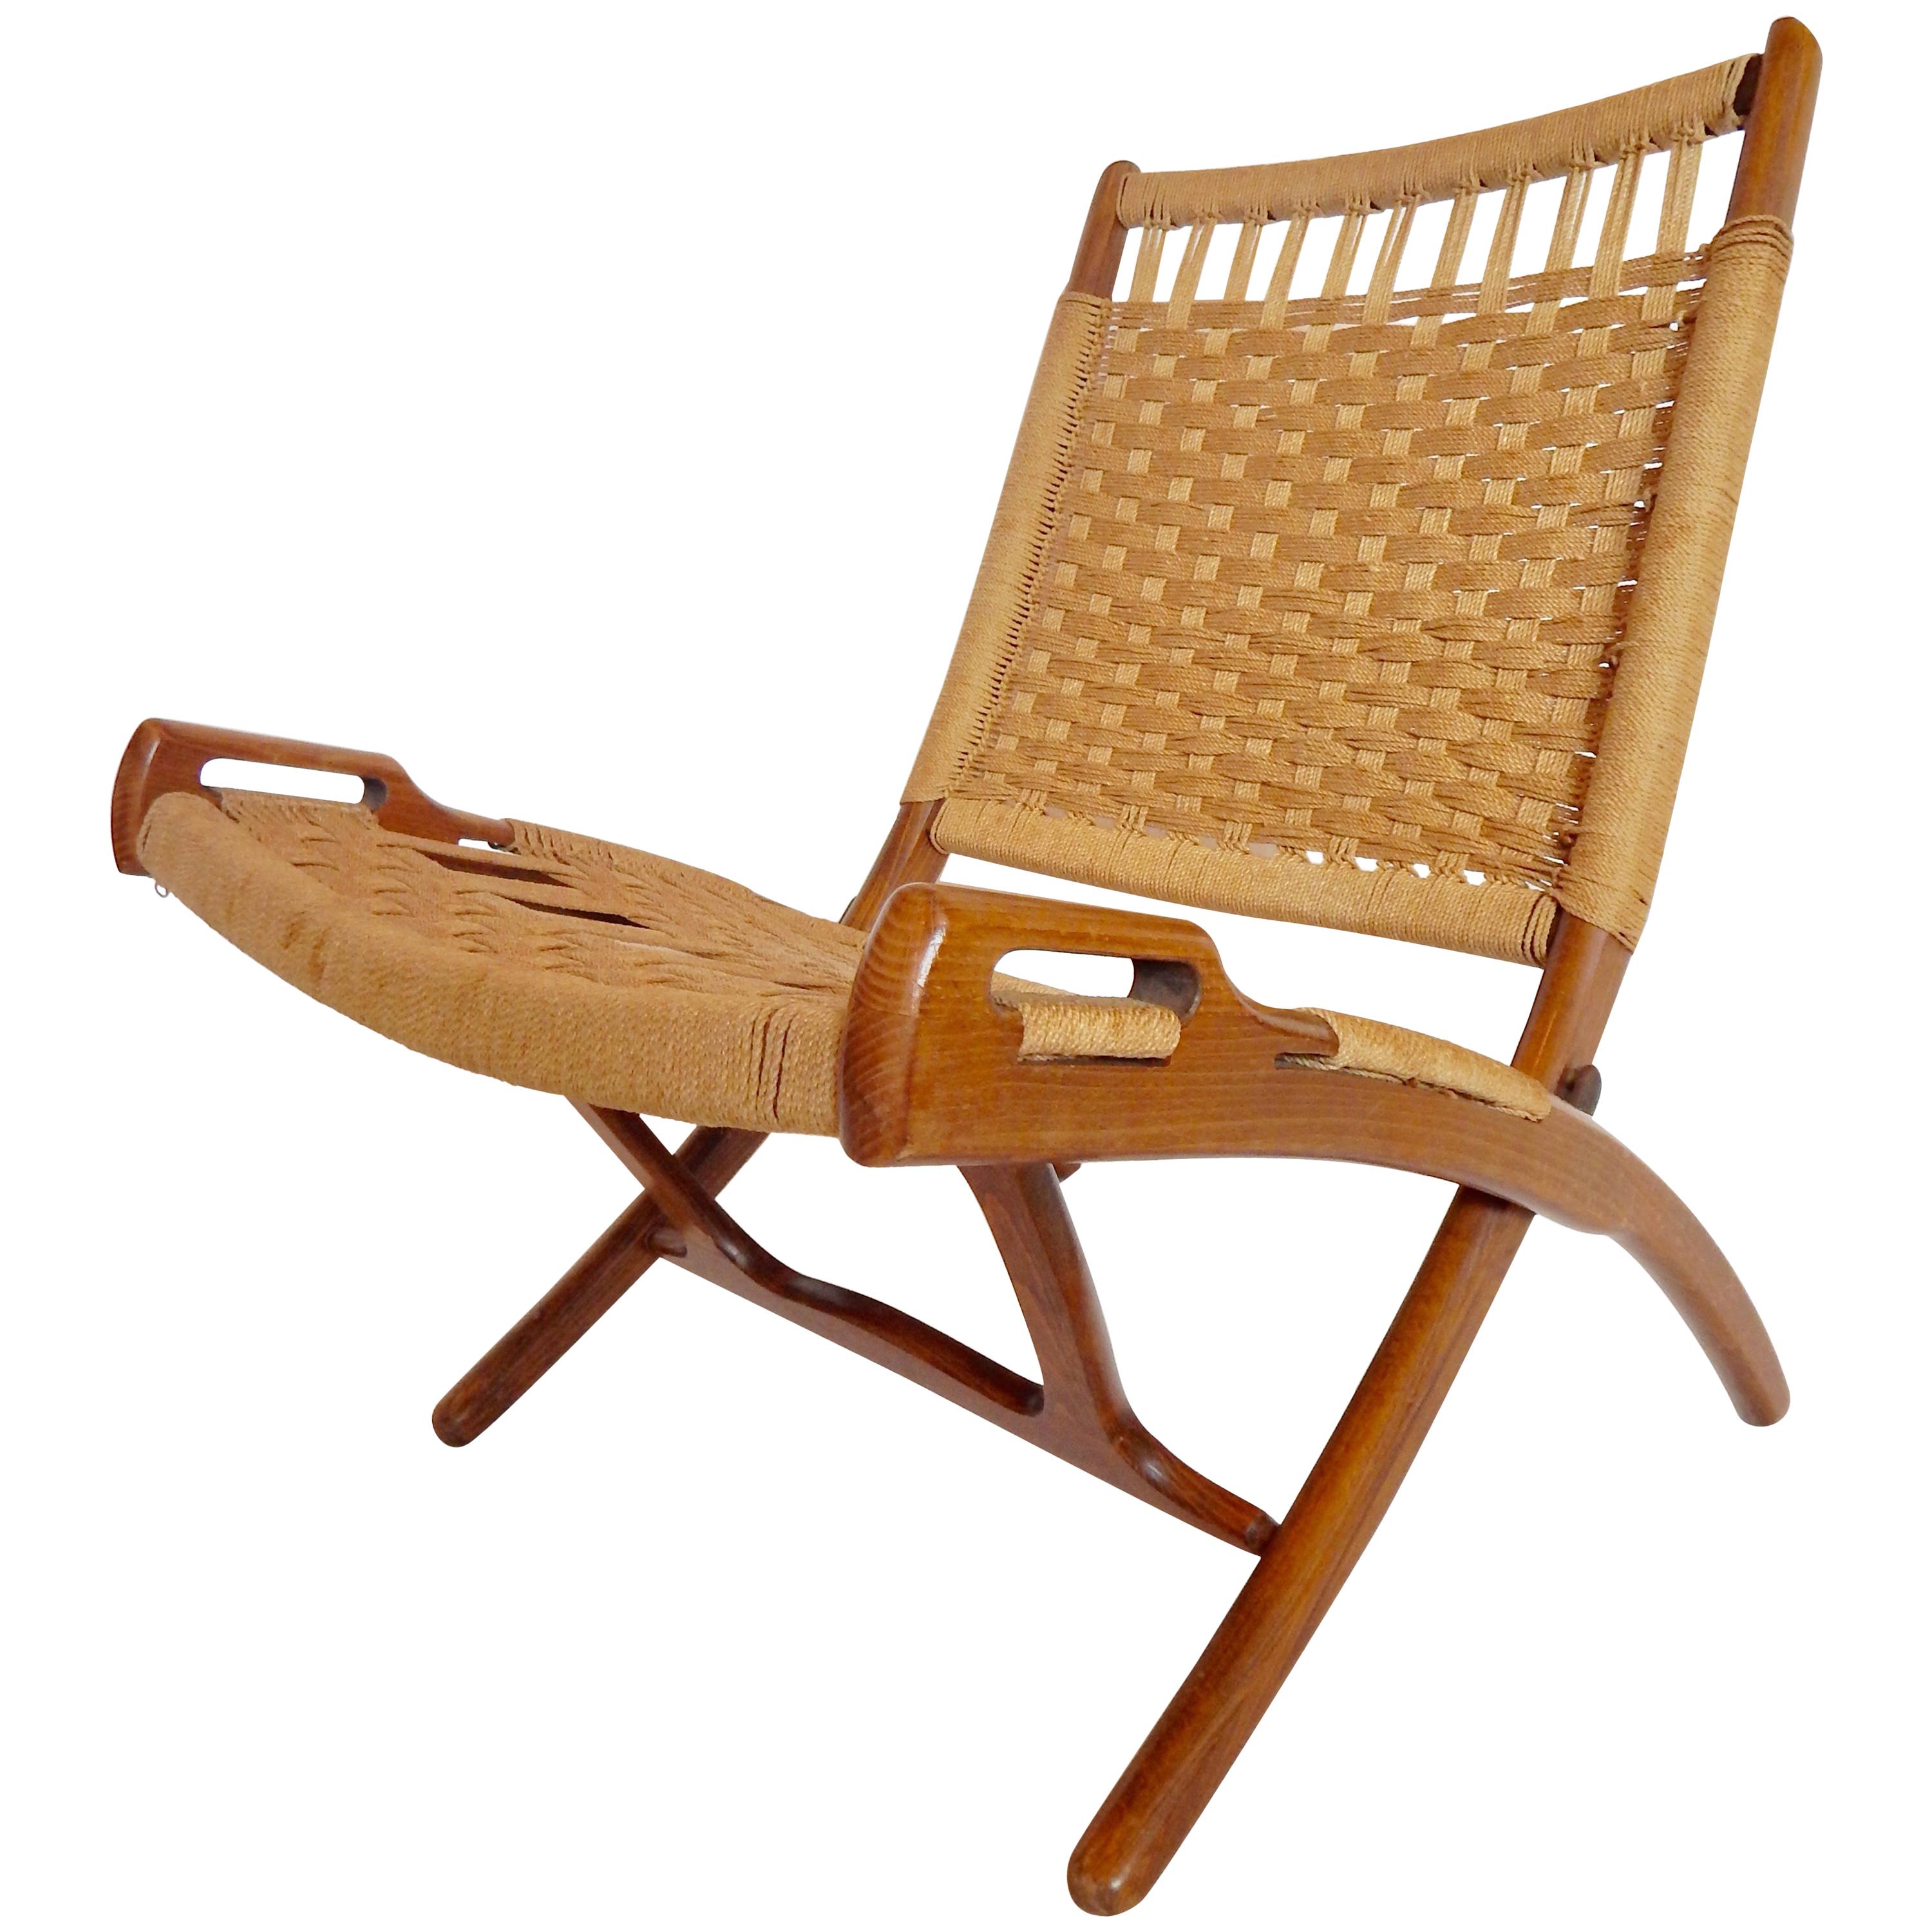 Midcentury Woven Folding Chair with Handles